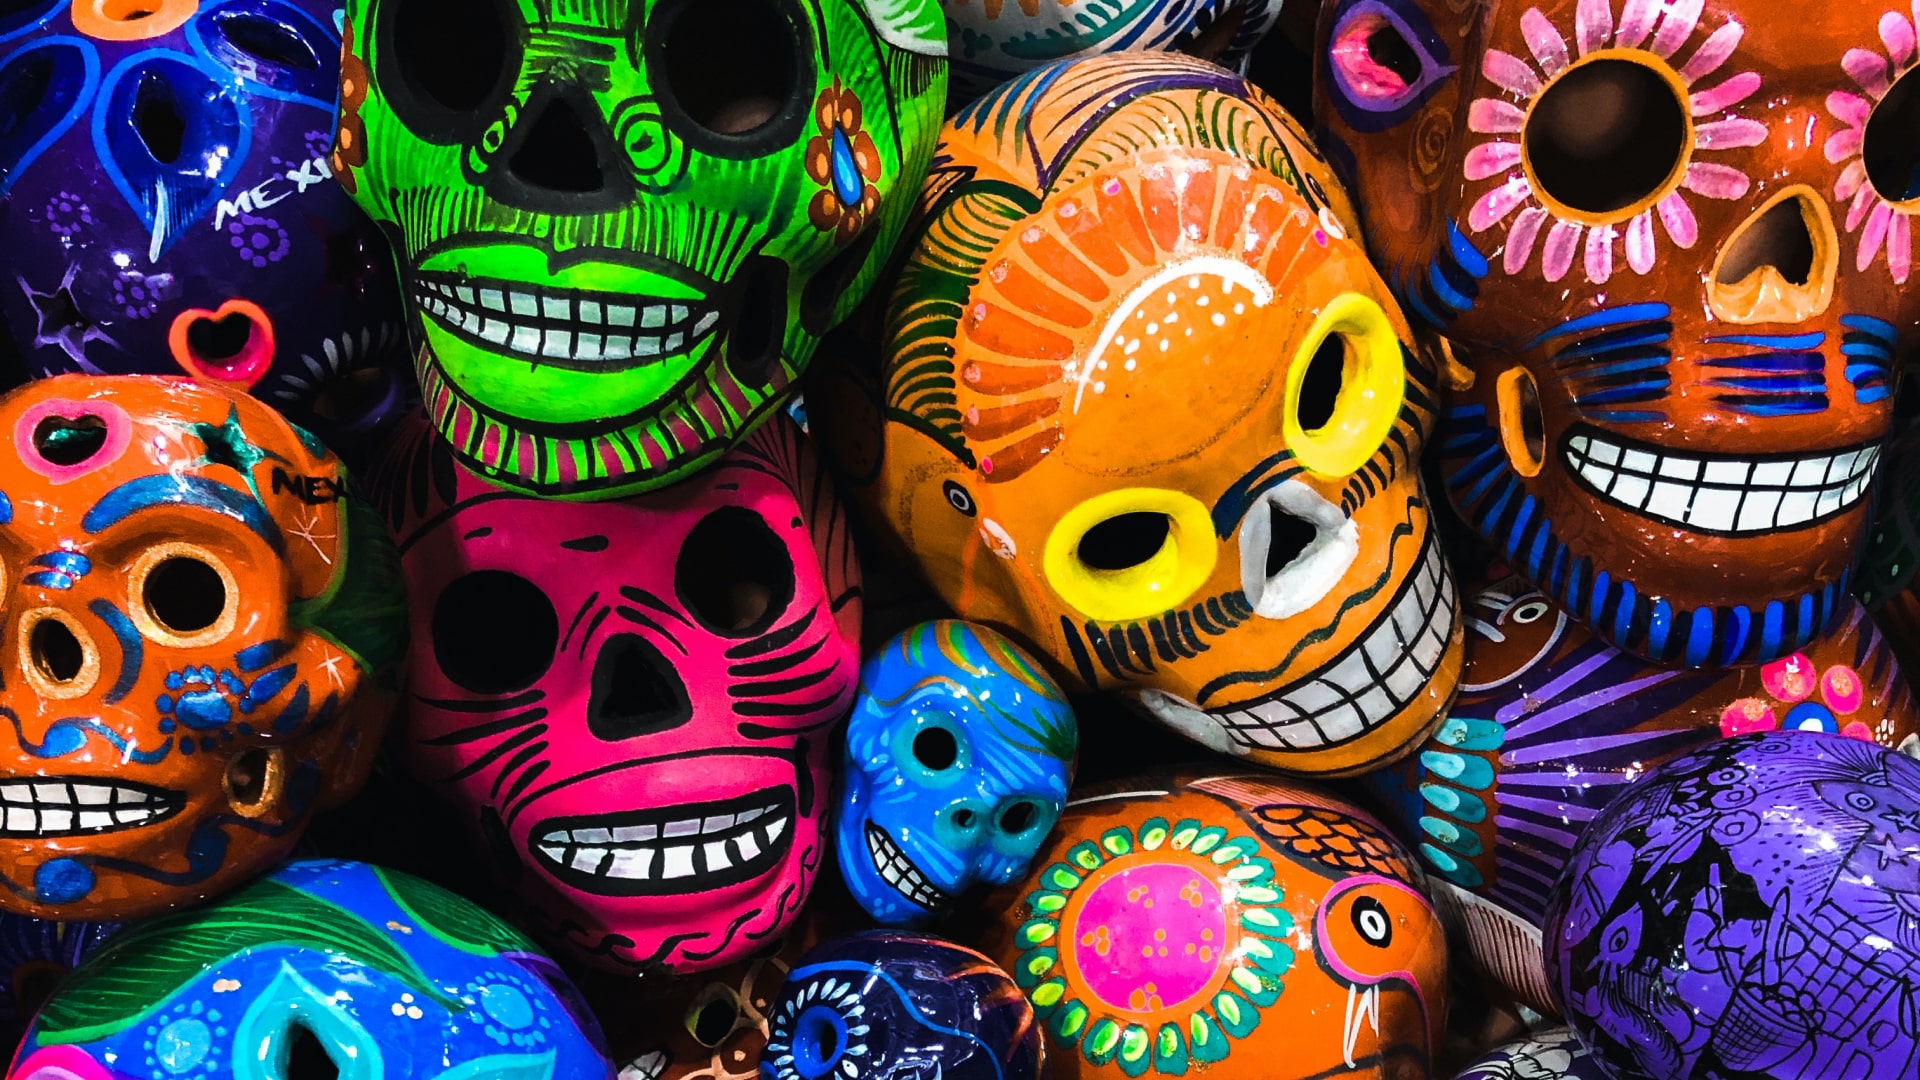 Celebrating the Day of the Dead in Mexico